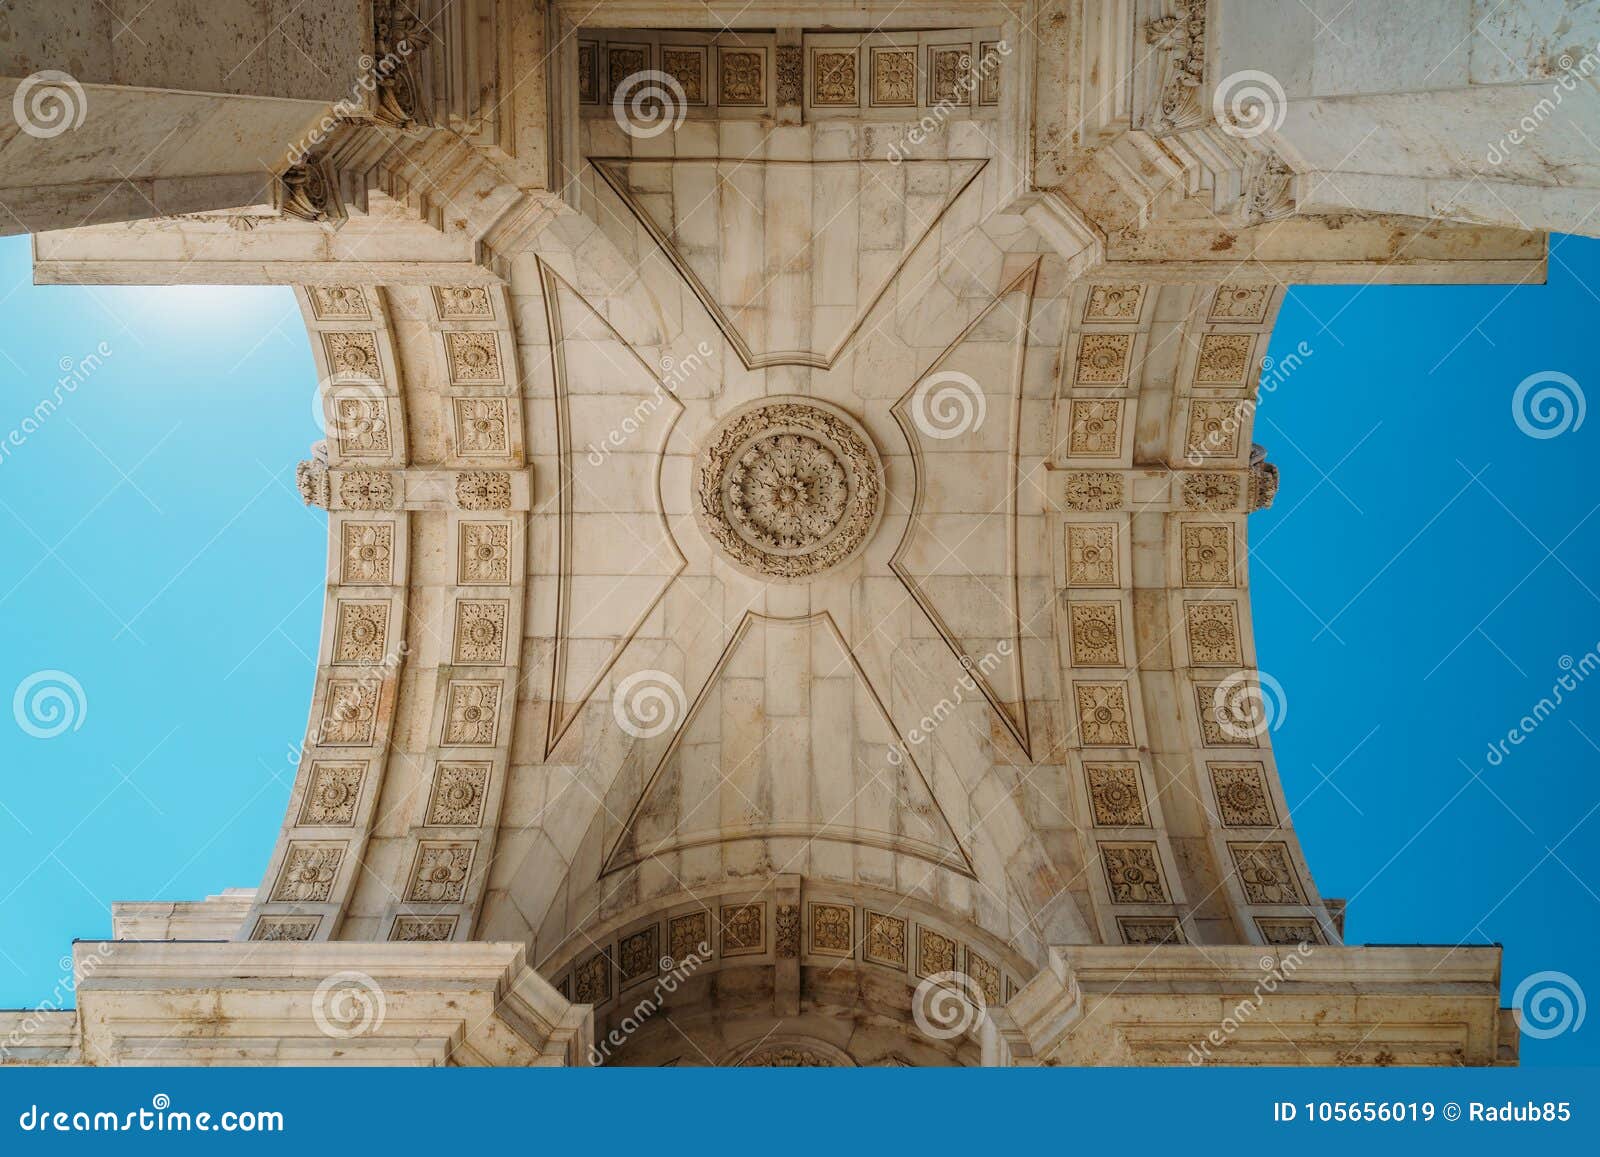 architectural details of rua augusta arch in lisbon city of portugal